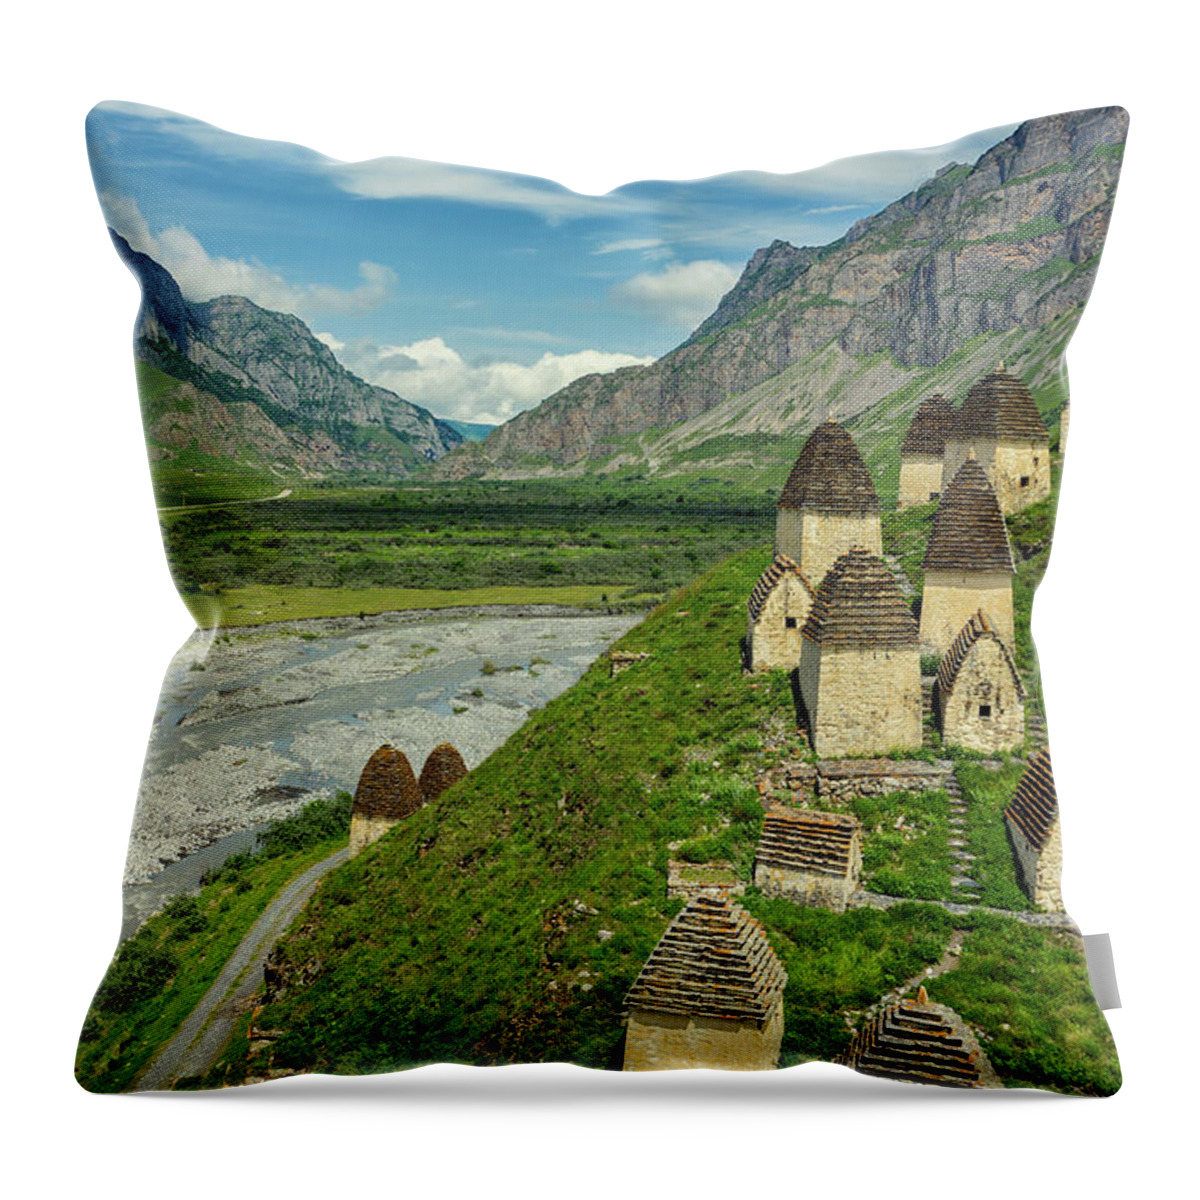 Cemetery Throw Pillow featuring the photograph Dead Town Dargavs In North Ossetia by Mikhail Kokhanchikov